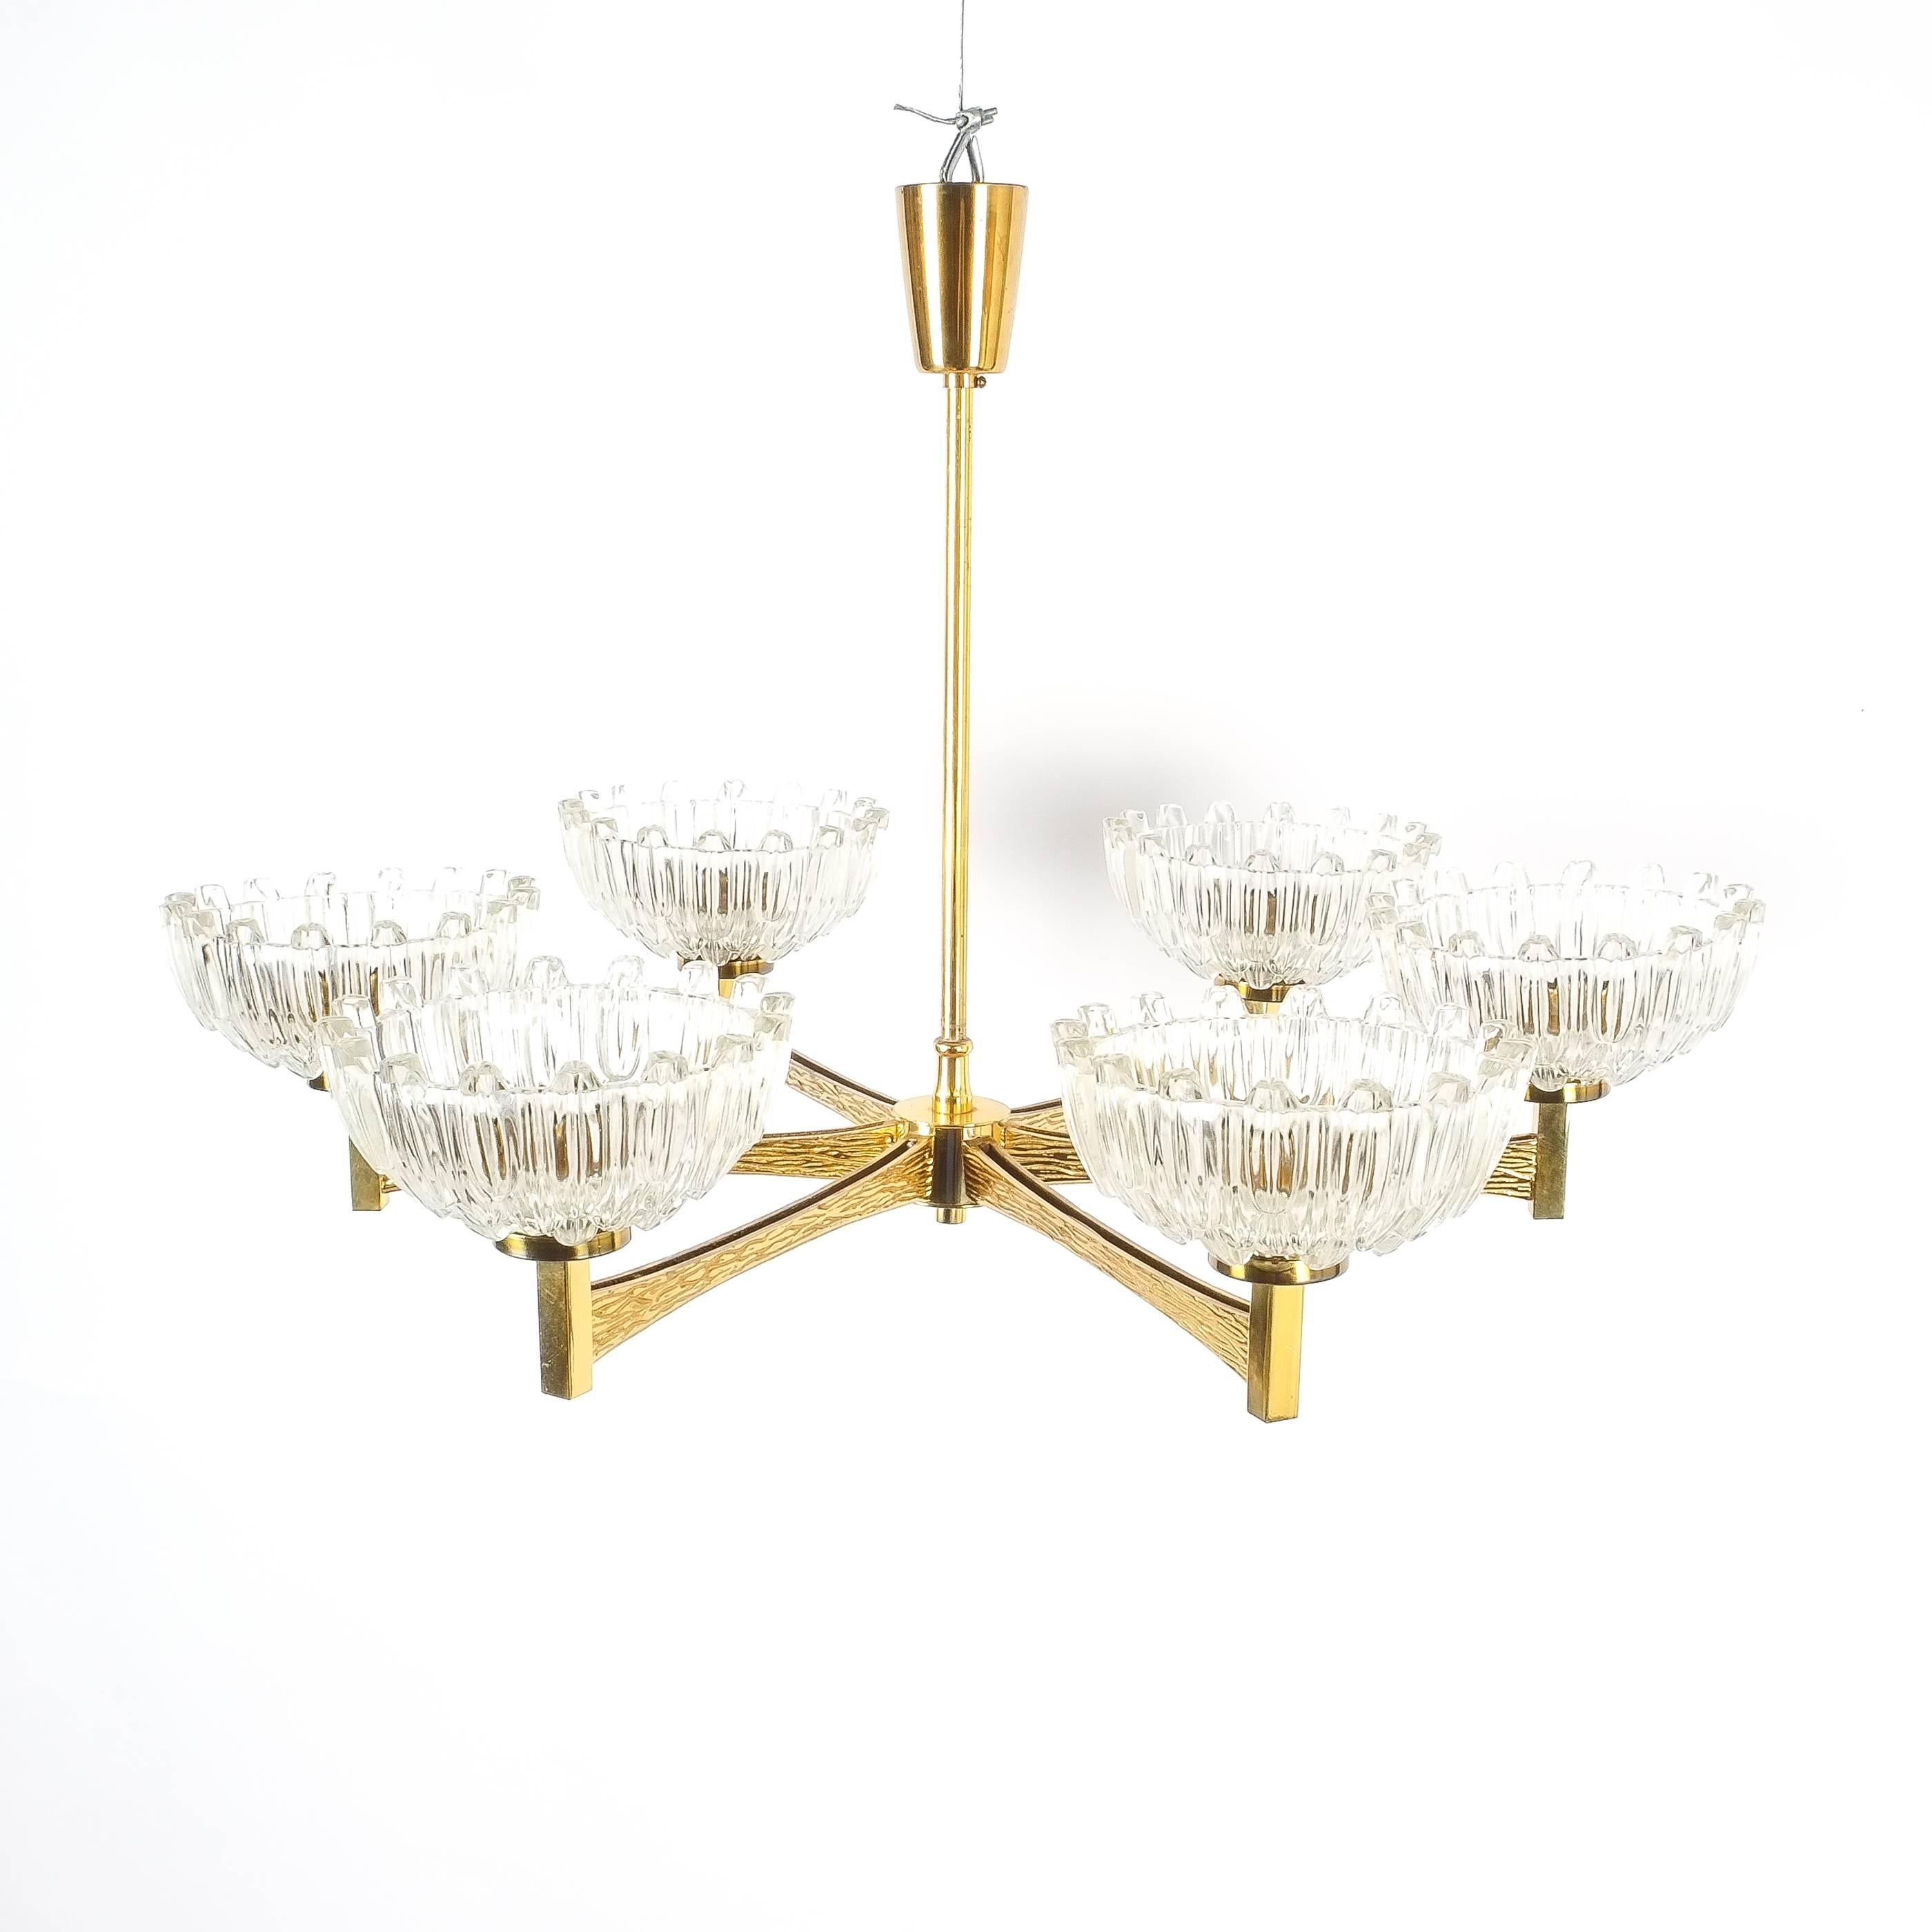 Hans-Agne Jakobsson Attributed Six-Arm Chandelier from Brass Glass, 1960 For Sale 1